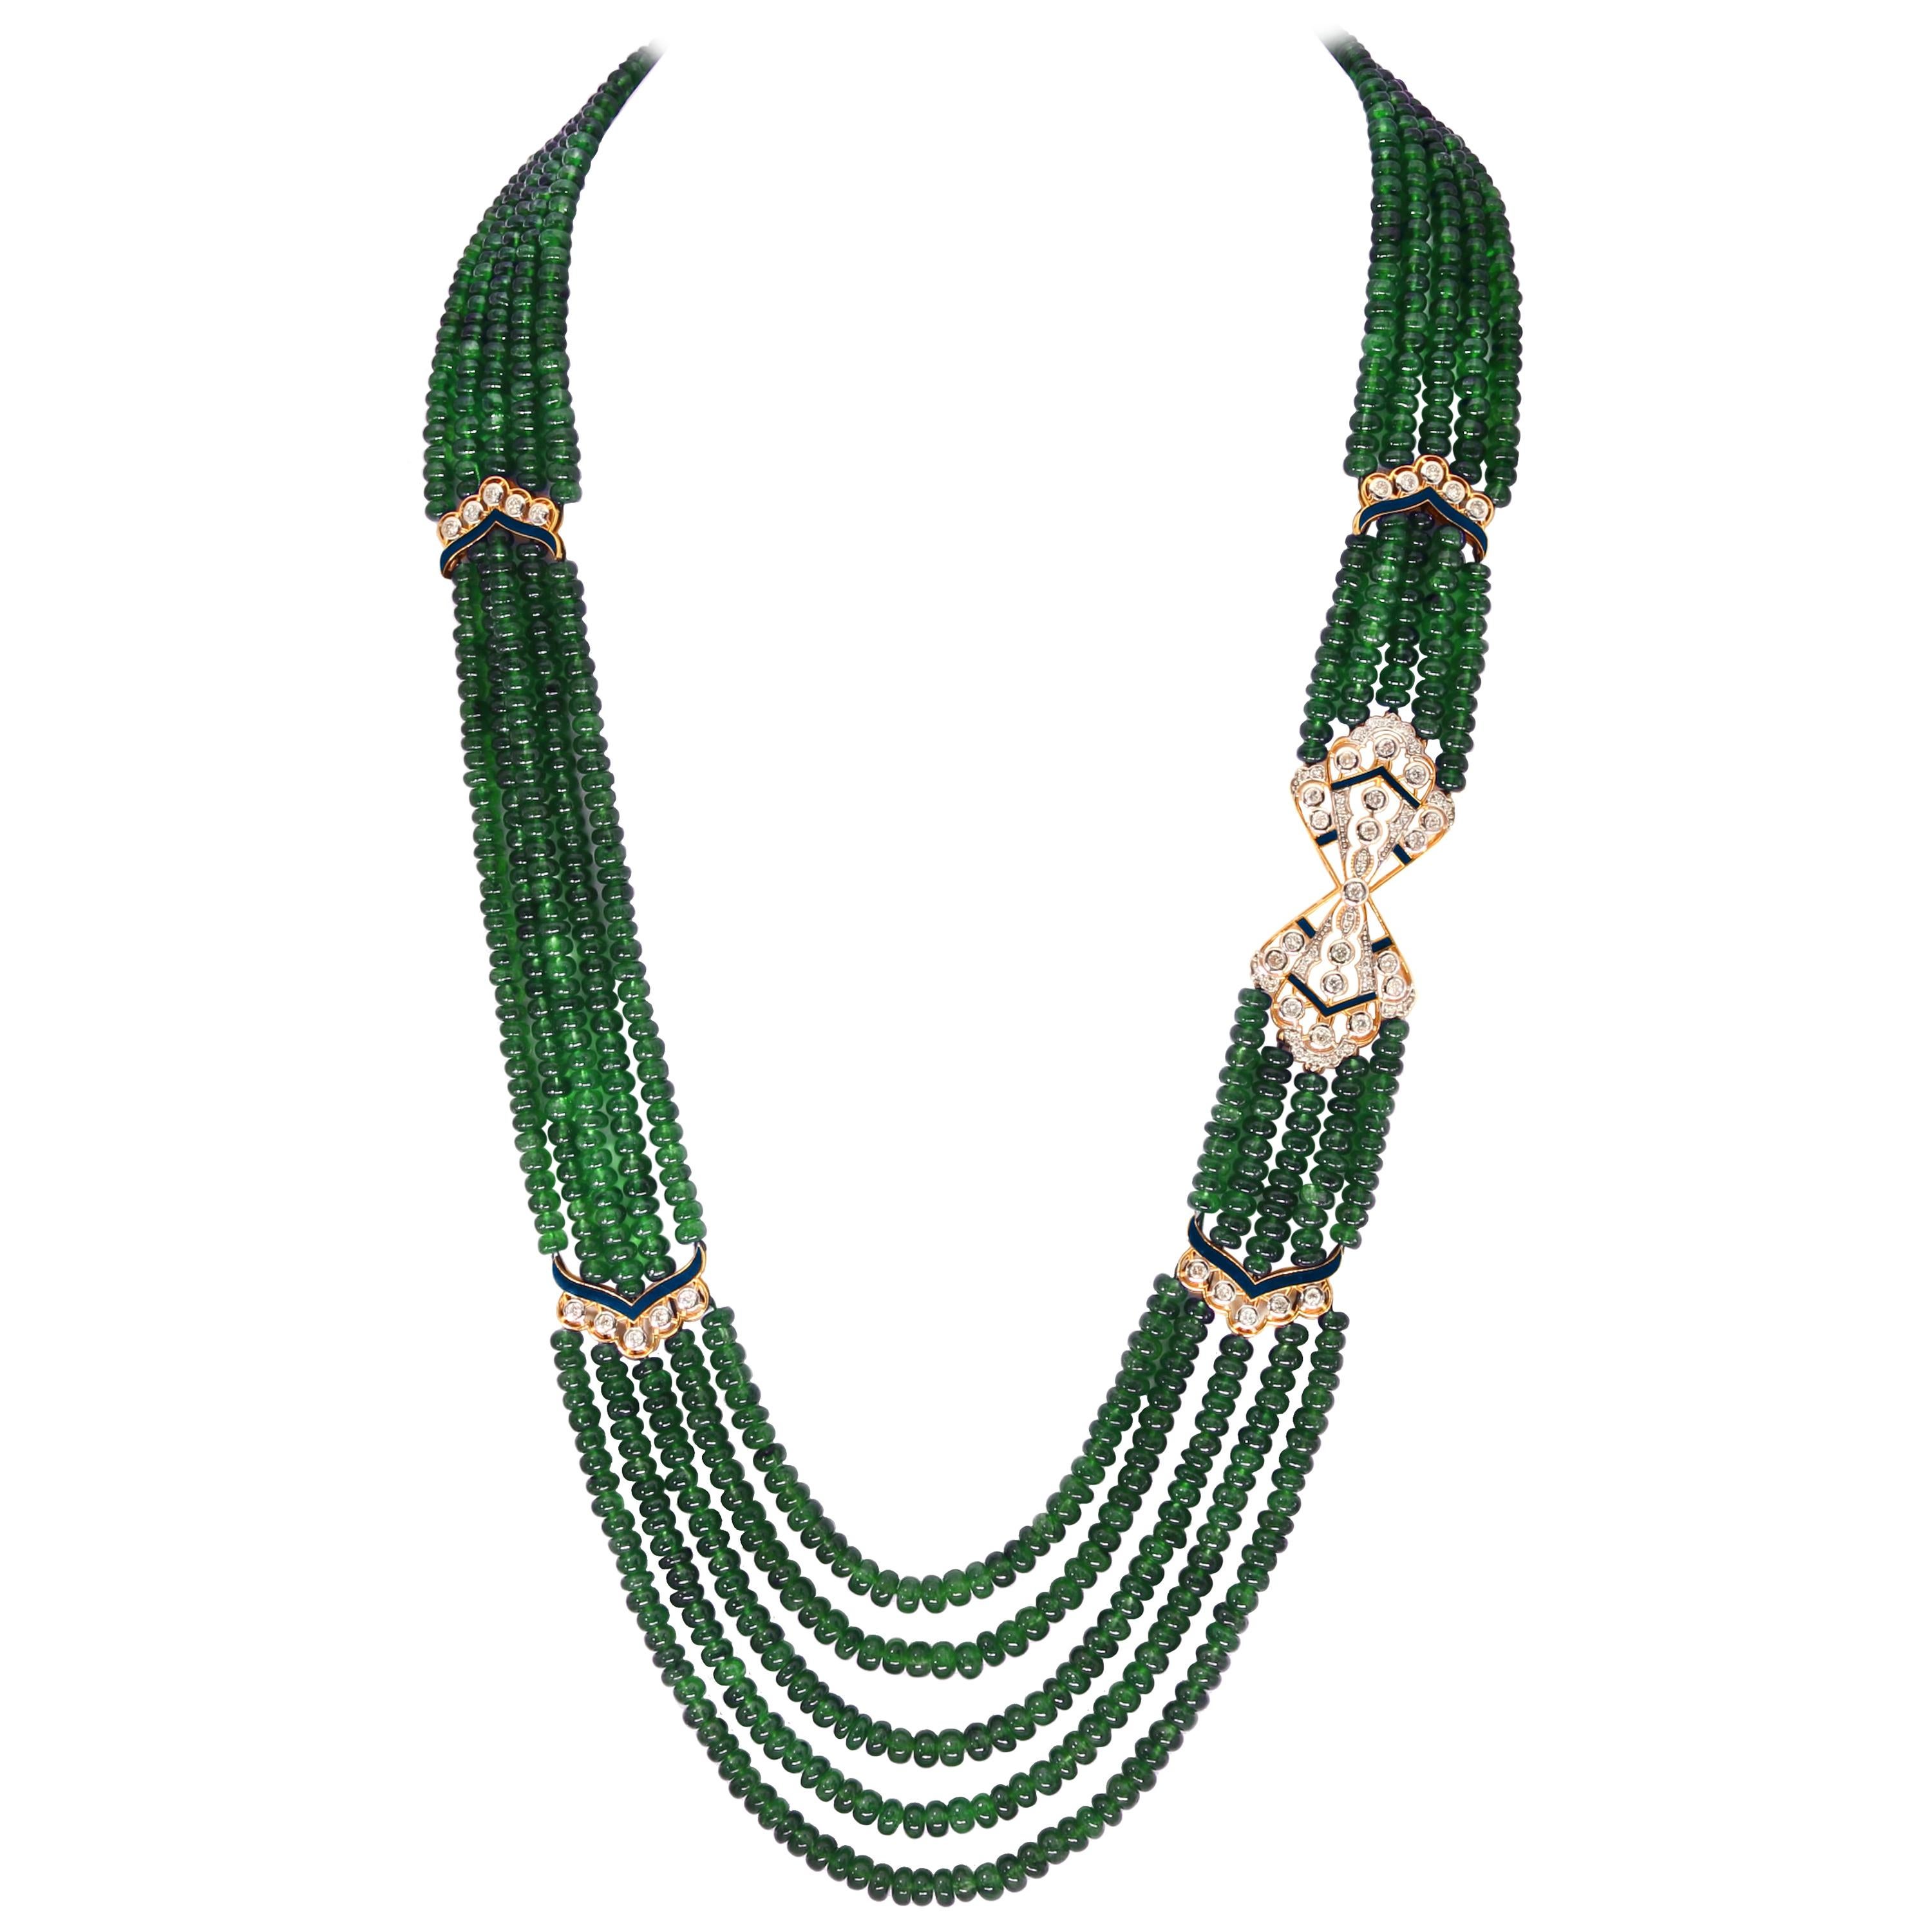 Silver Necklace Multi Stone Necklace,AAA Multi Precious Necklace 41 Cts Precious Stone Beads NirvanaIN Faceted Emerald Bead Necklace 